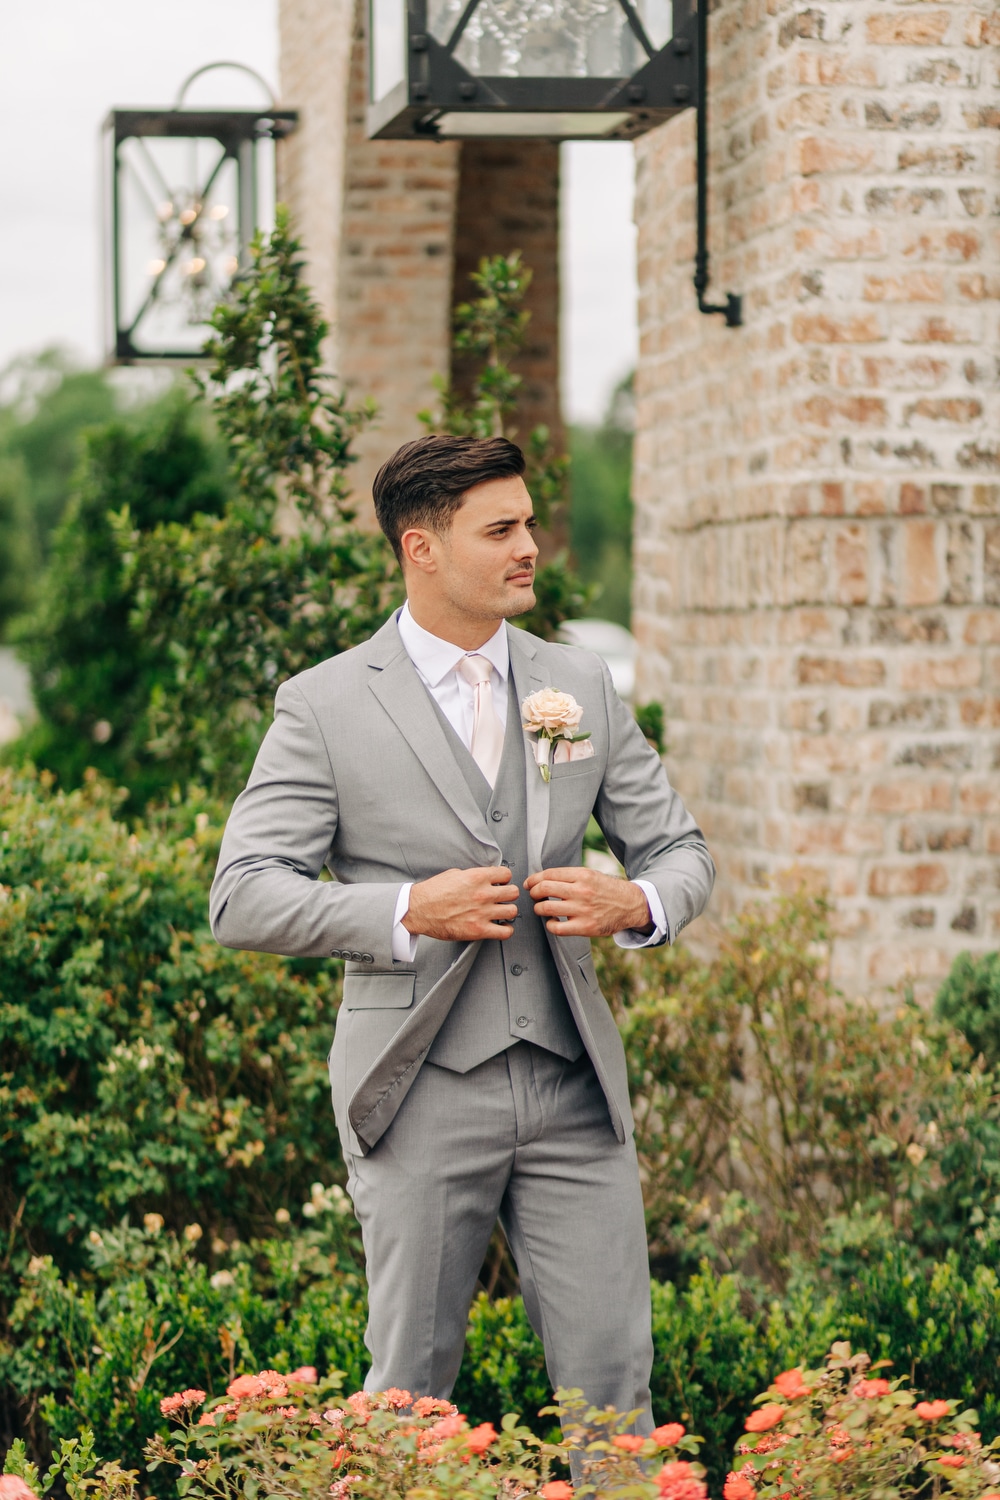 A close-up picture of a man in a light grey summer wedding suit